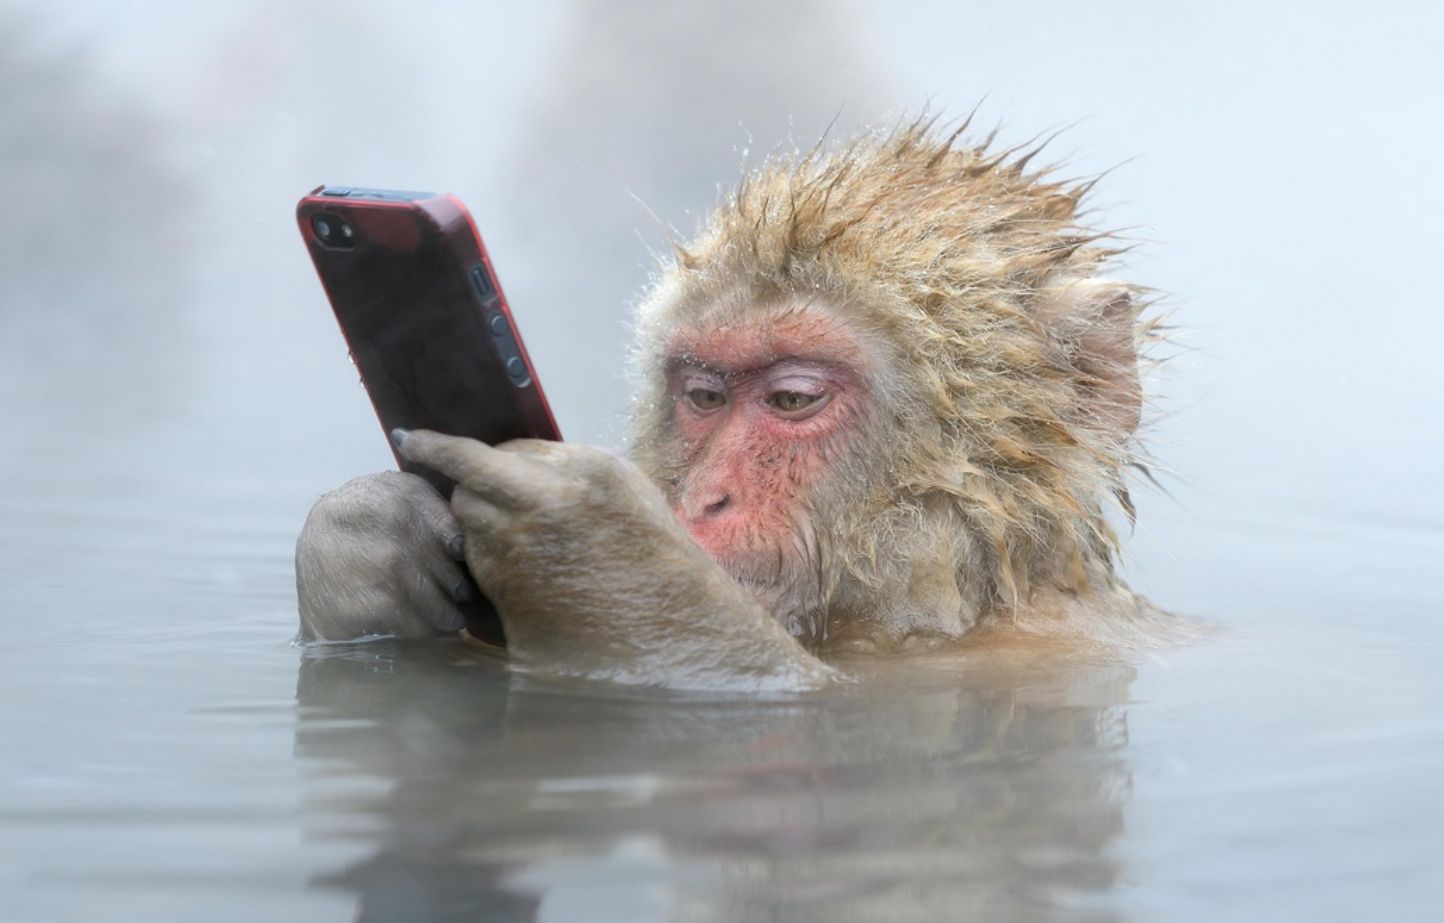 monkey in a hot tub with iphone Blank Meme Template